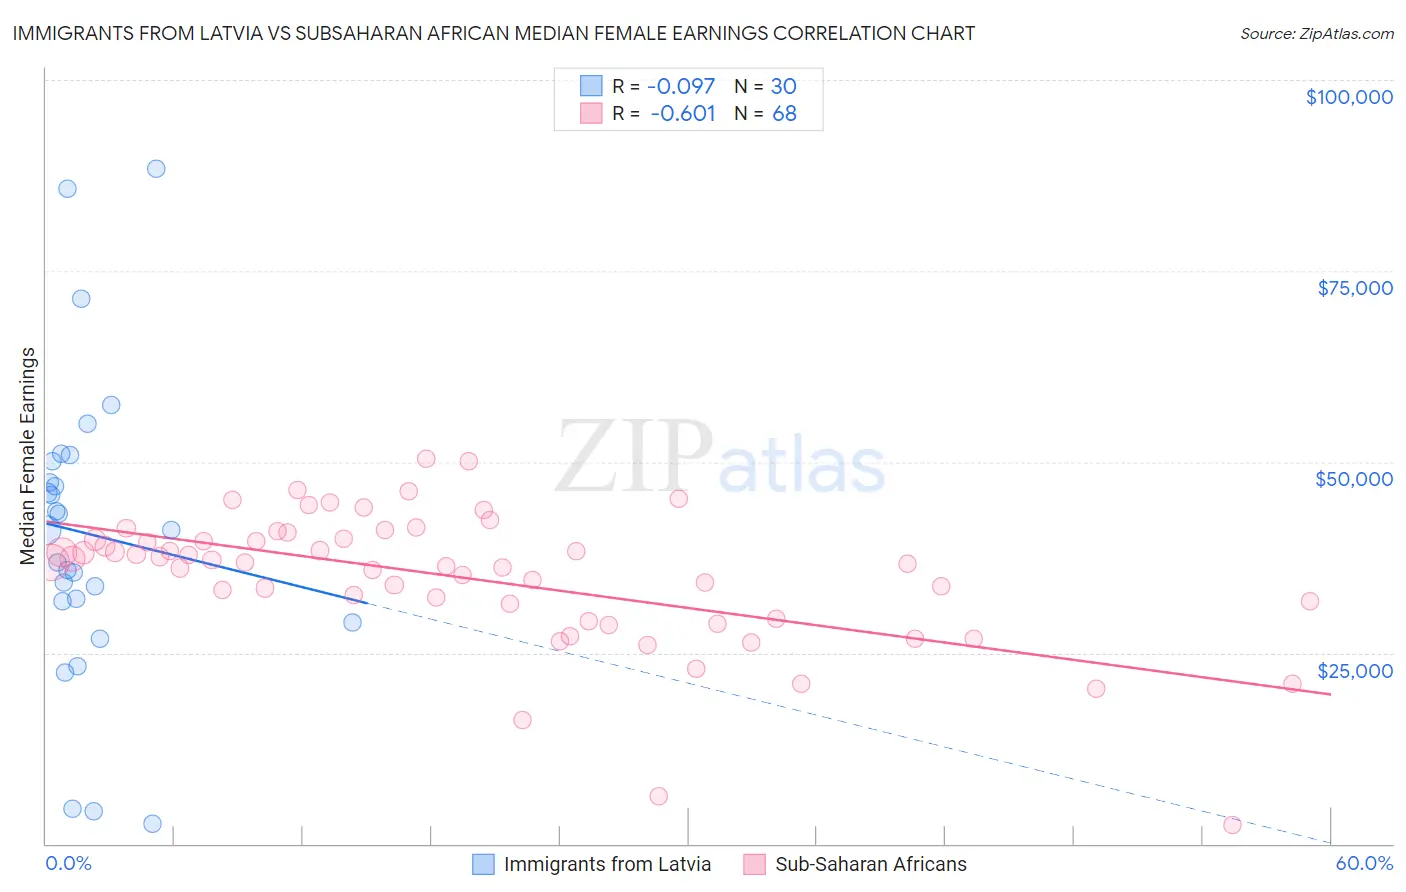 Immigrants from Latvia vs Subsaharan African Median Female Earnings